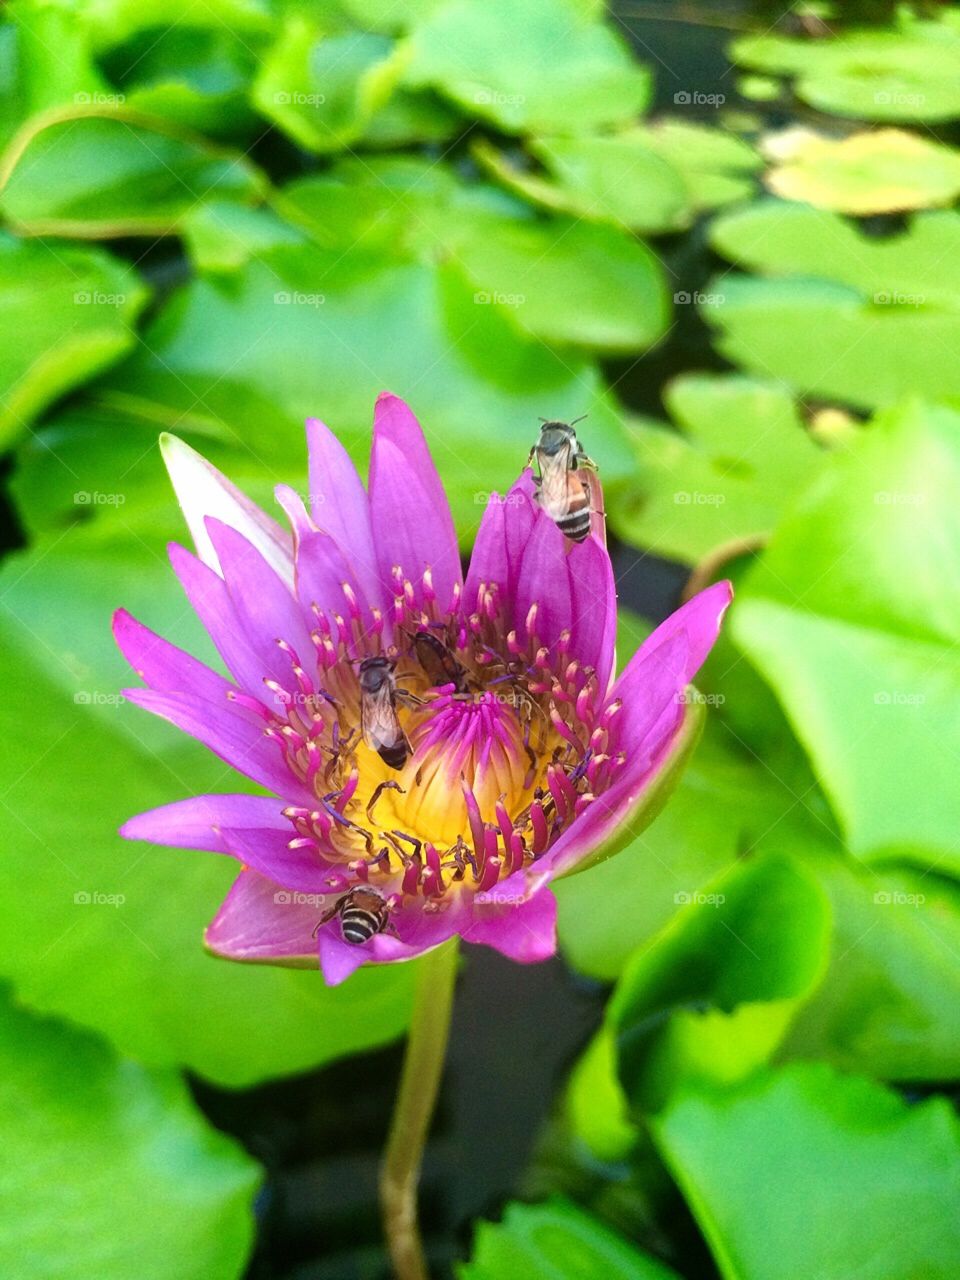 Lotus and bees